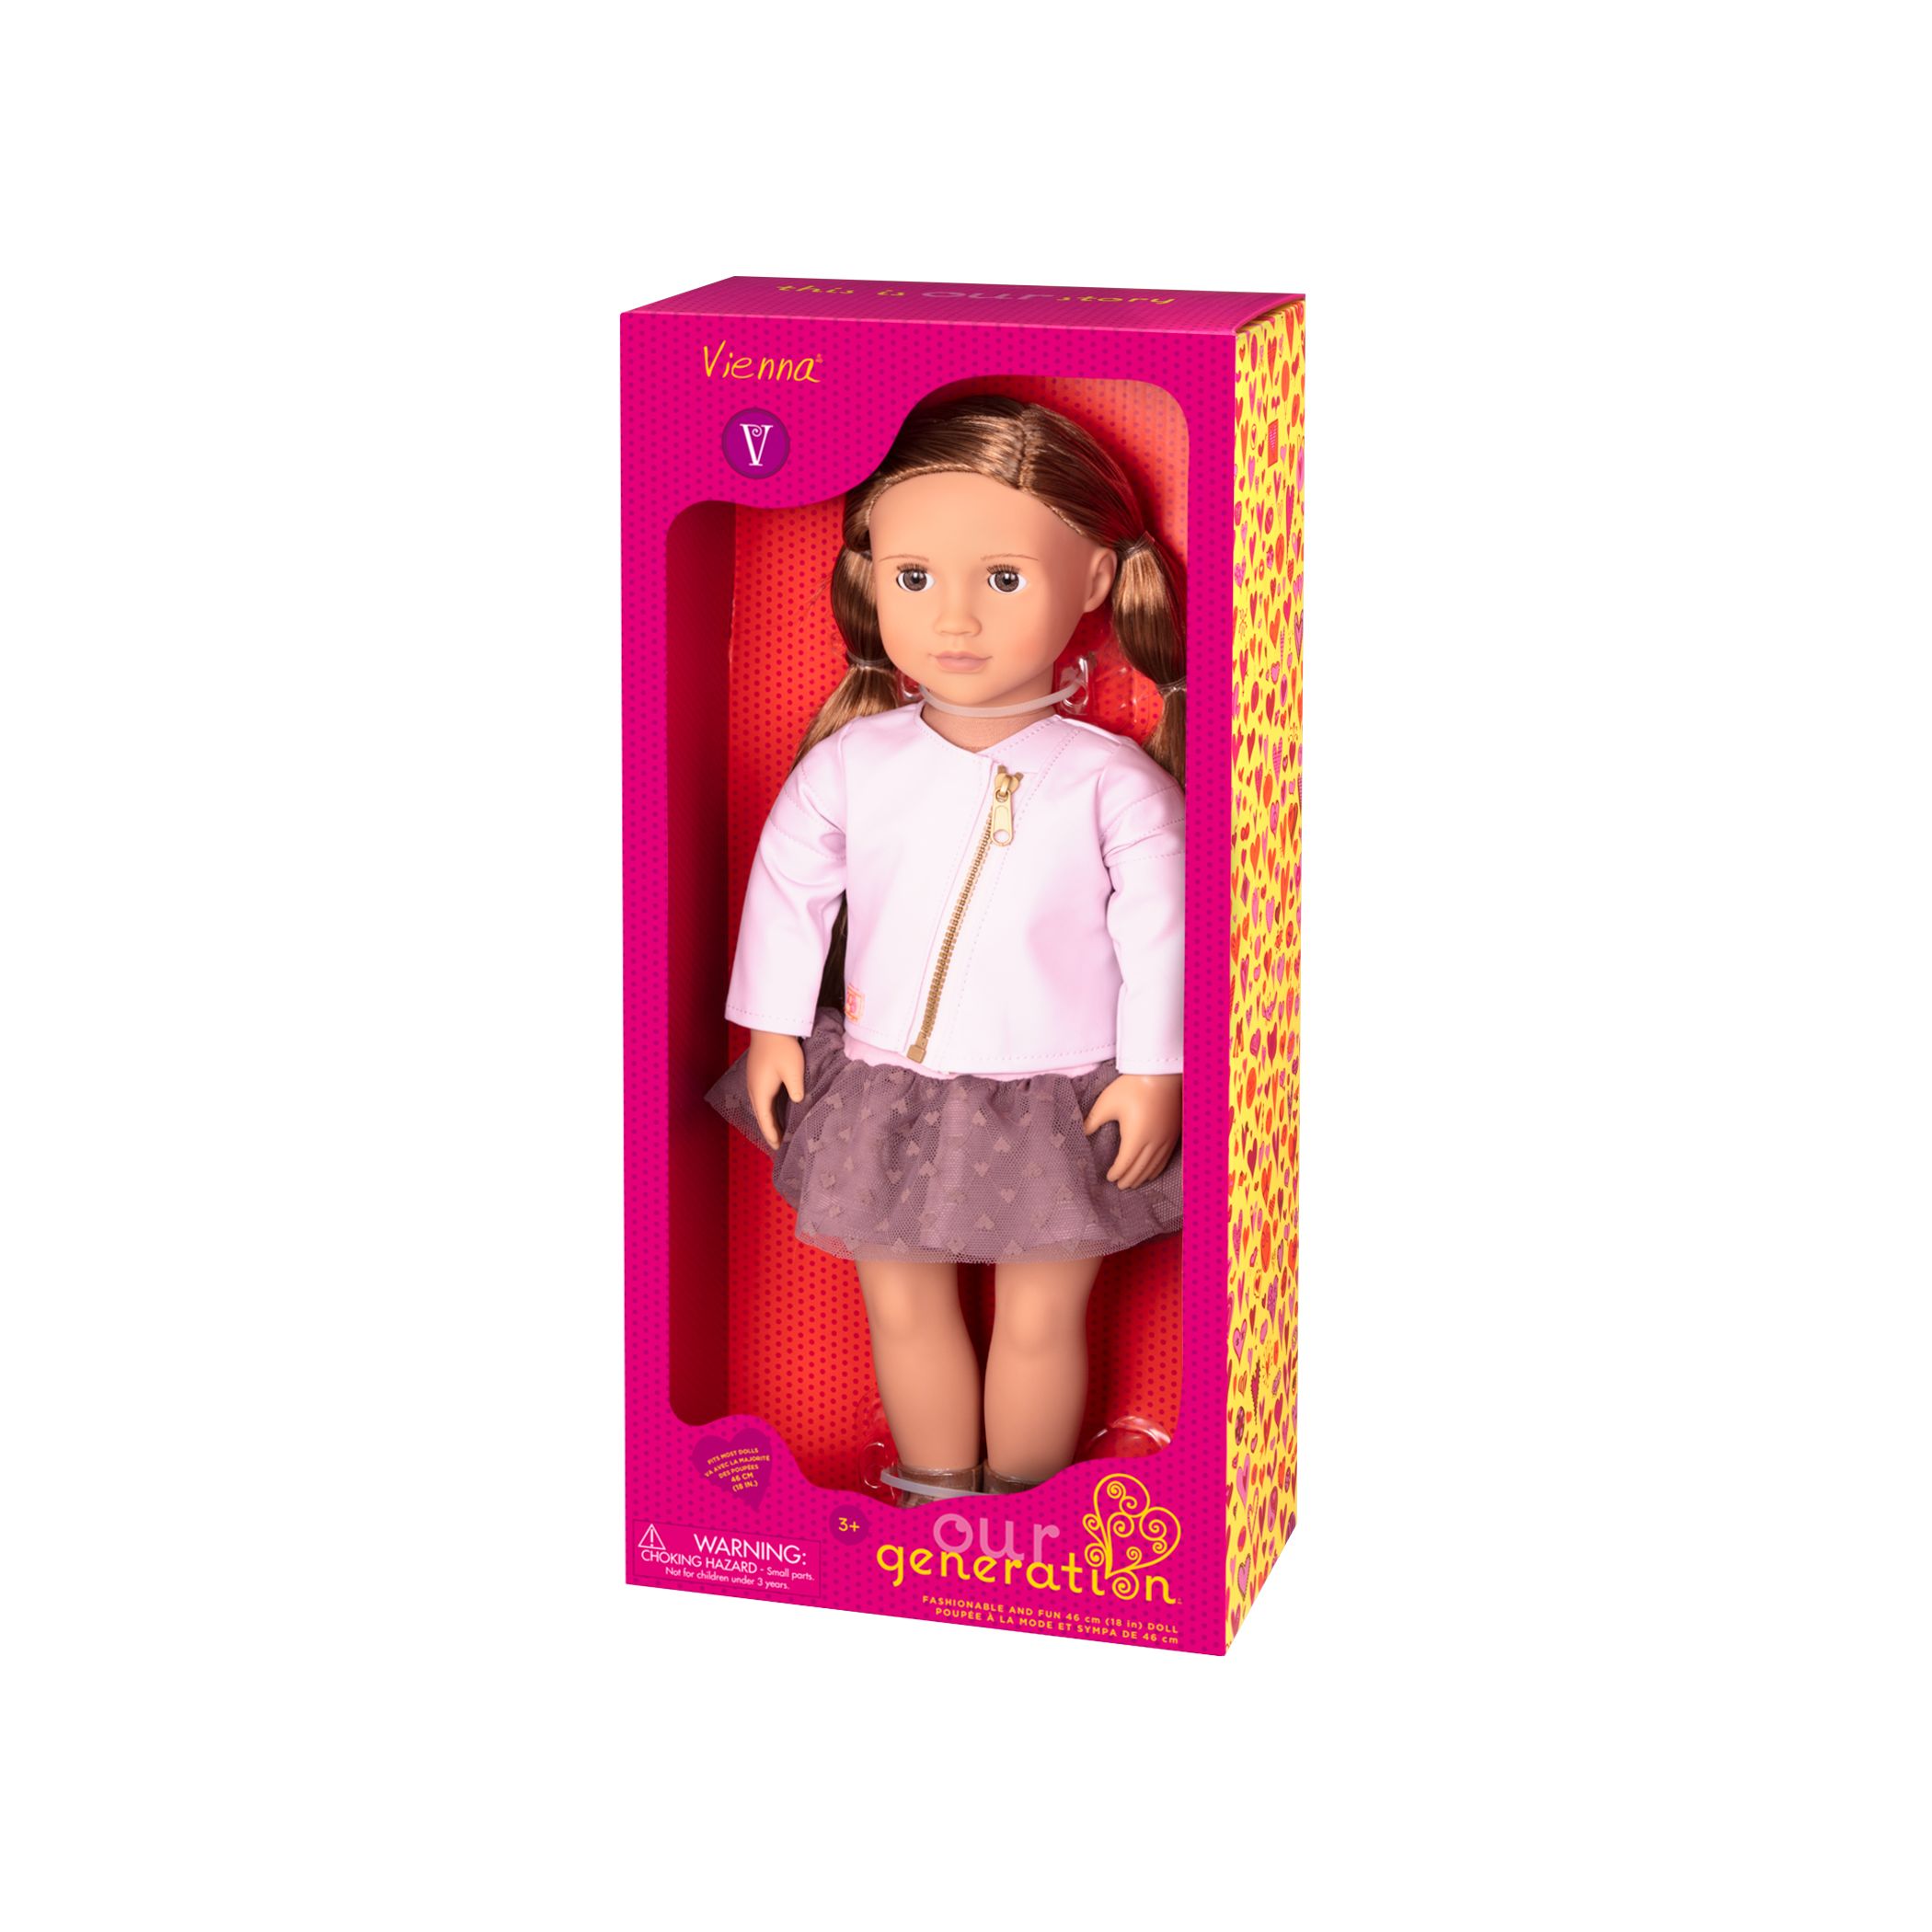 18-inch doll with light-brown hair and brown eyes